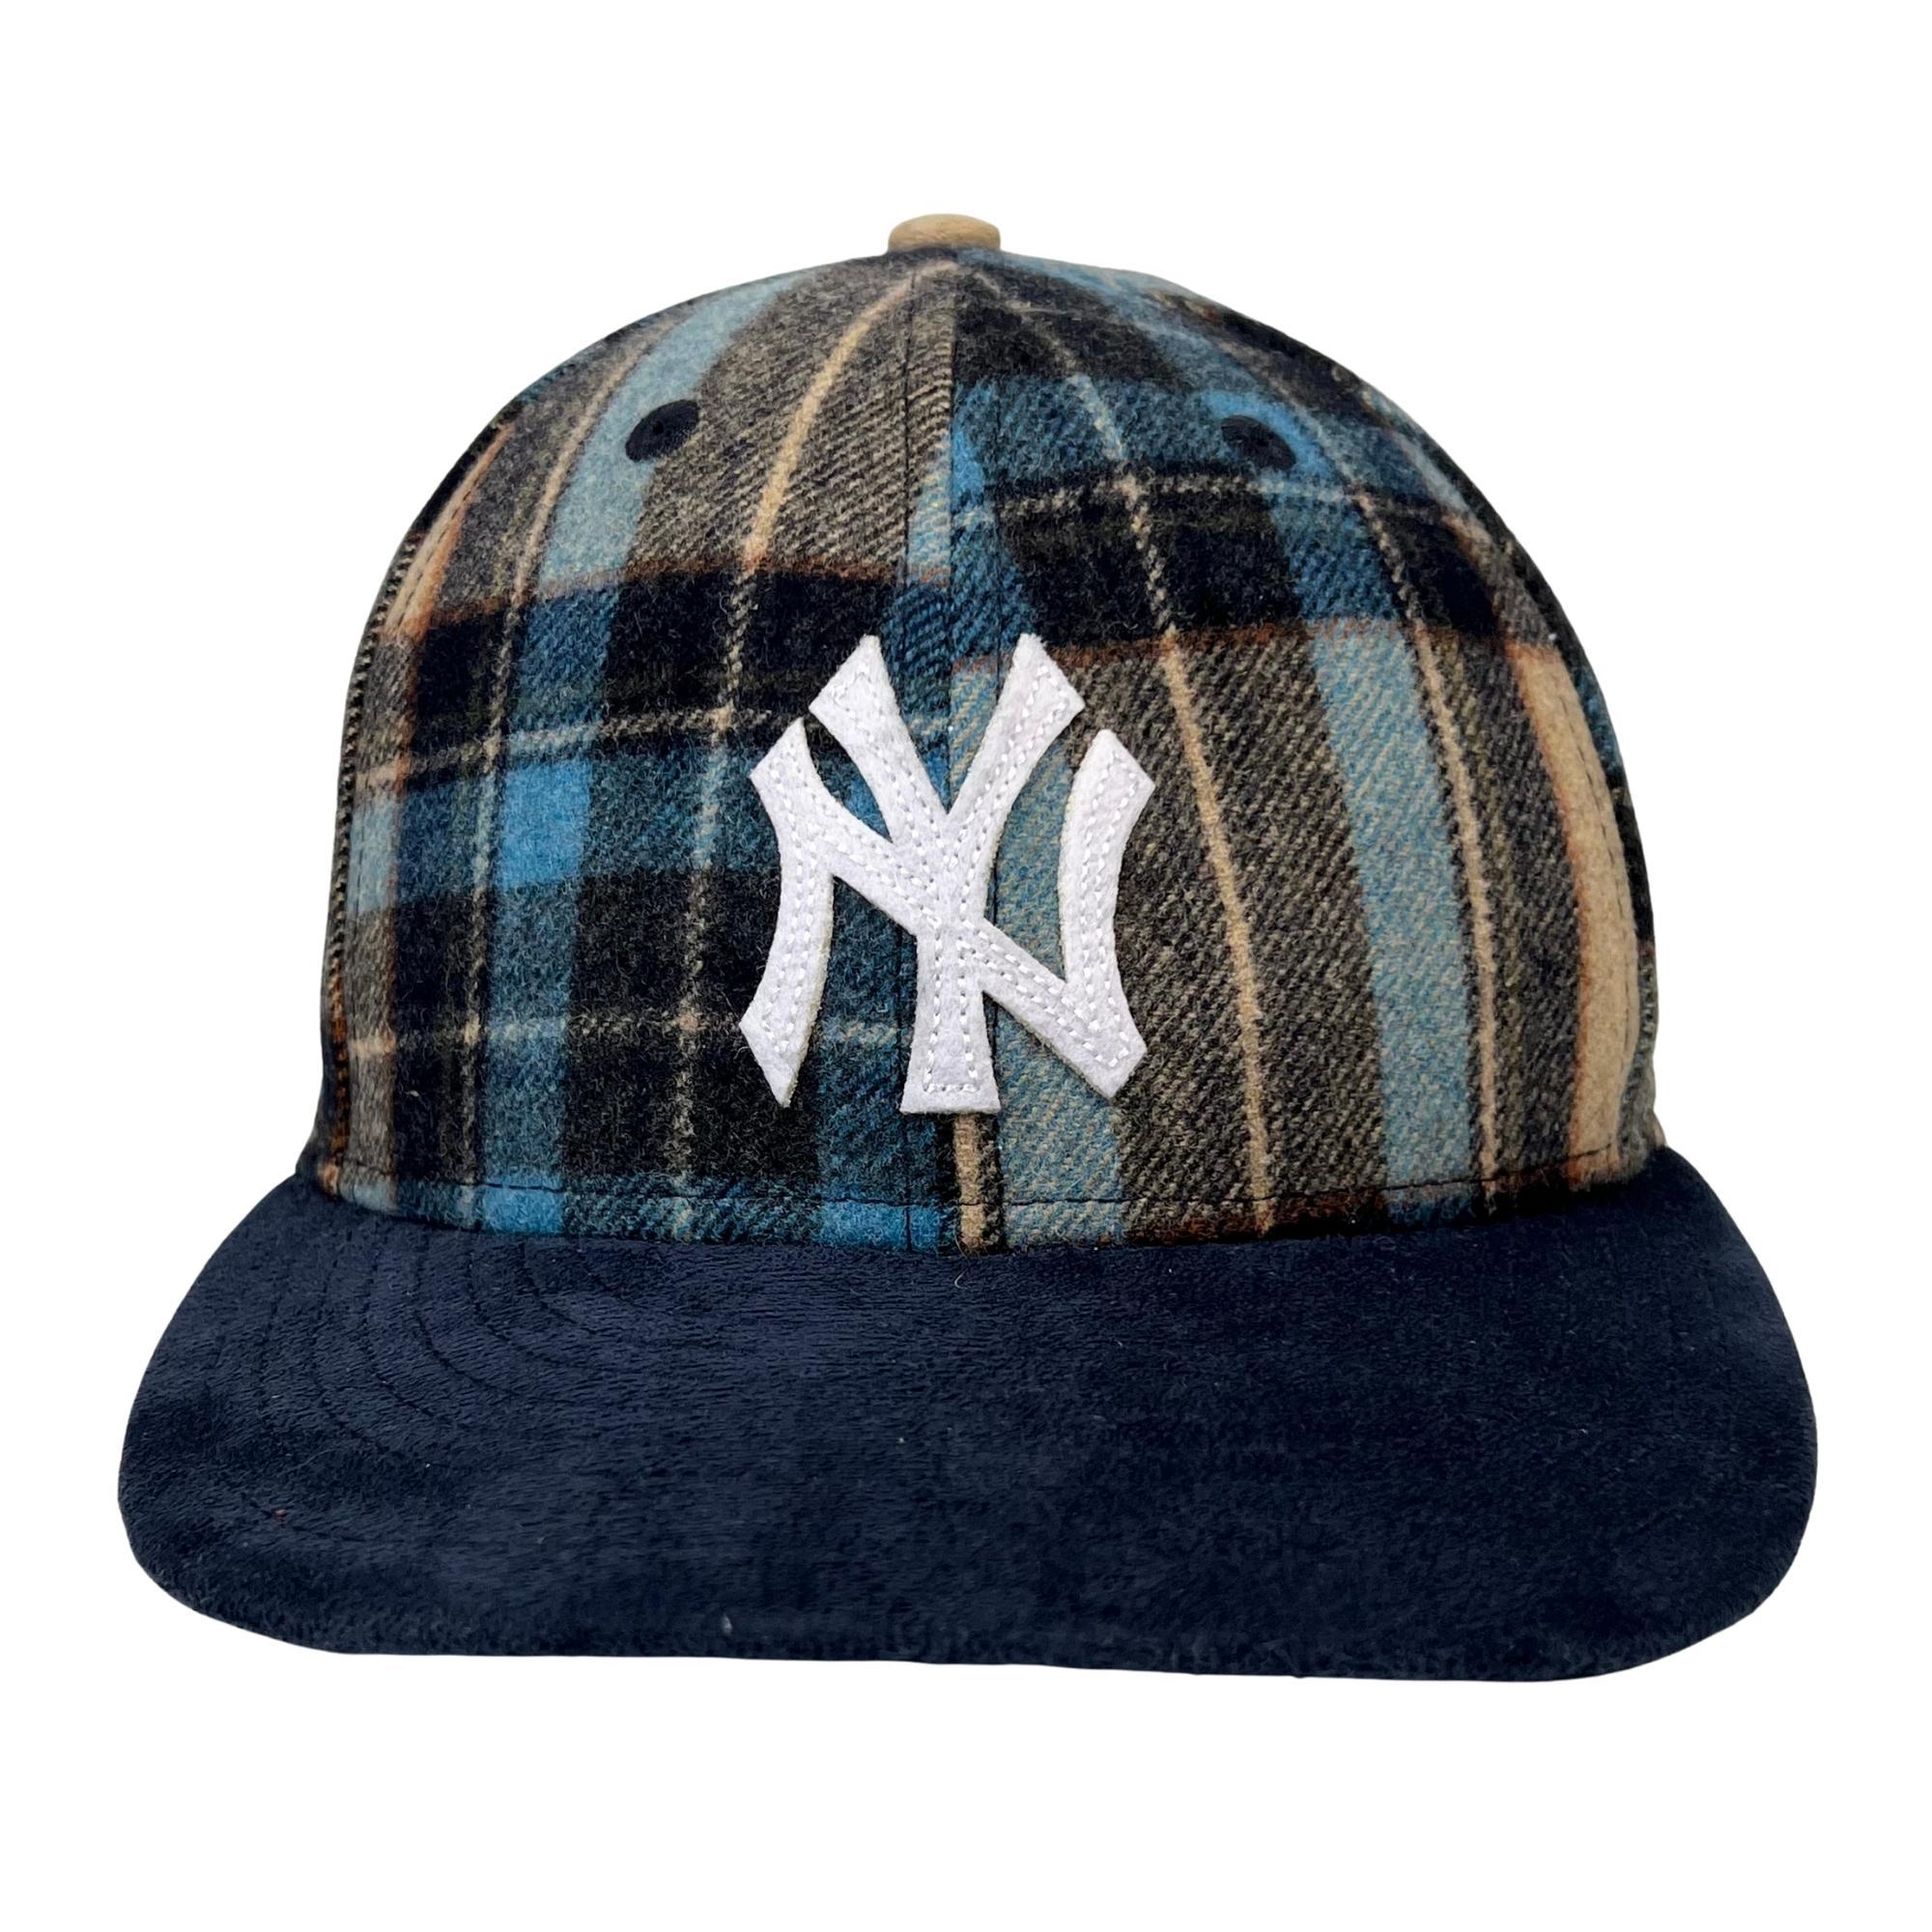 This hat is made with plaid wool fabric and features a sueded brim, an embroidered NY Yankees patch at front,
A New Era logo, a world series artworks embroidered at sides and a metal Kith & Kin plaque at